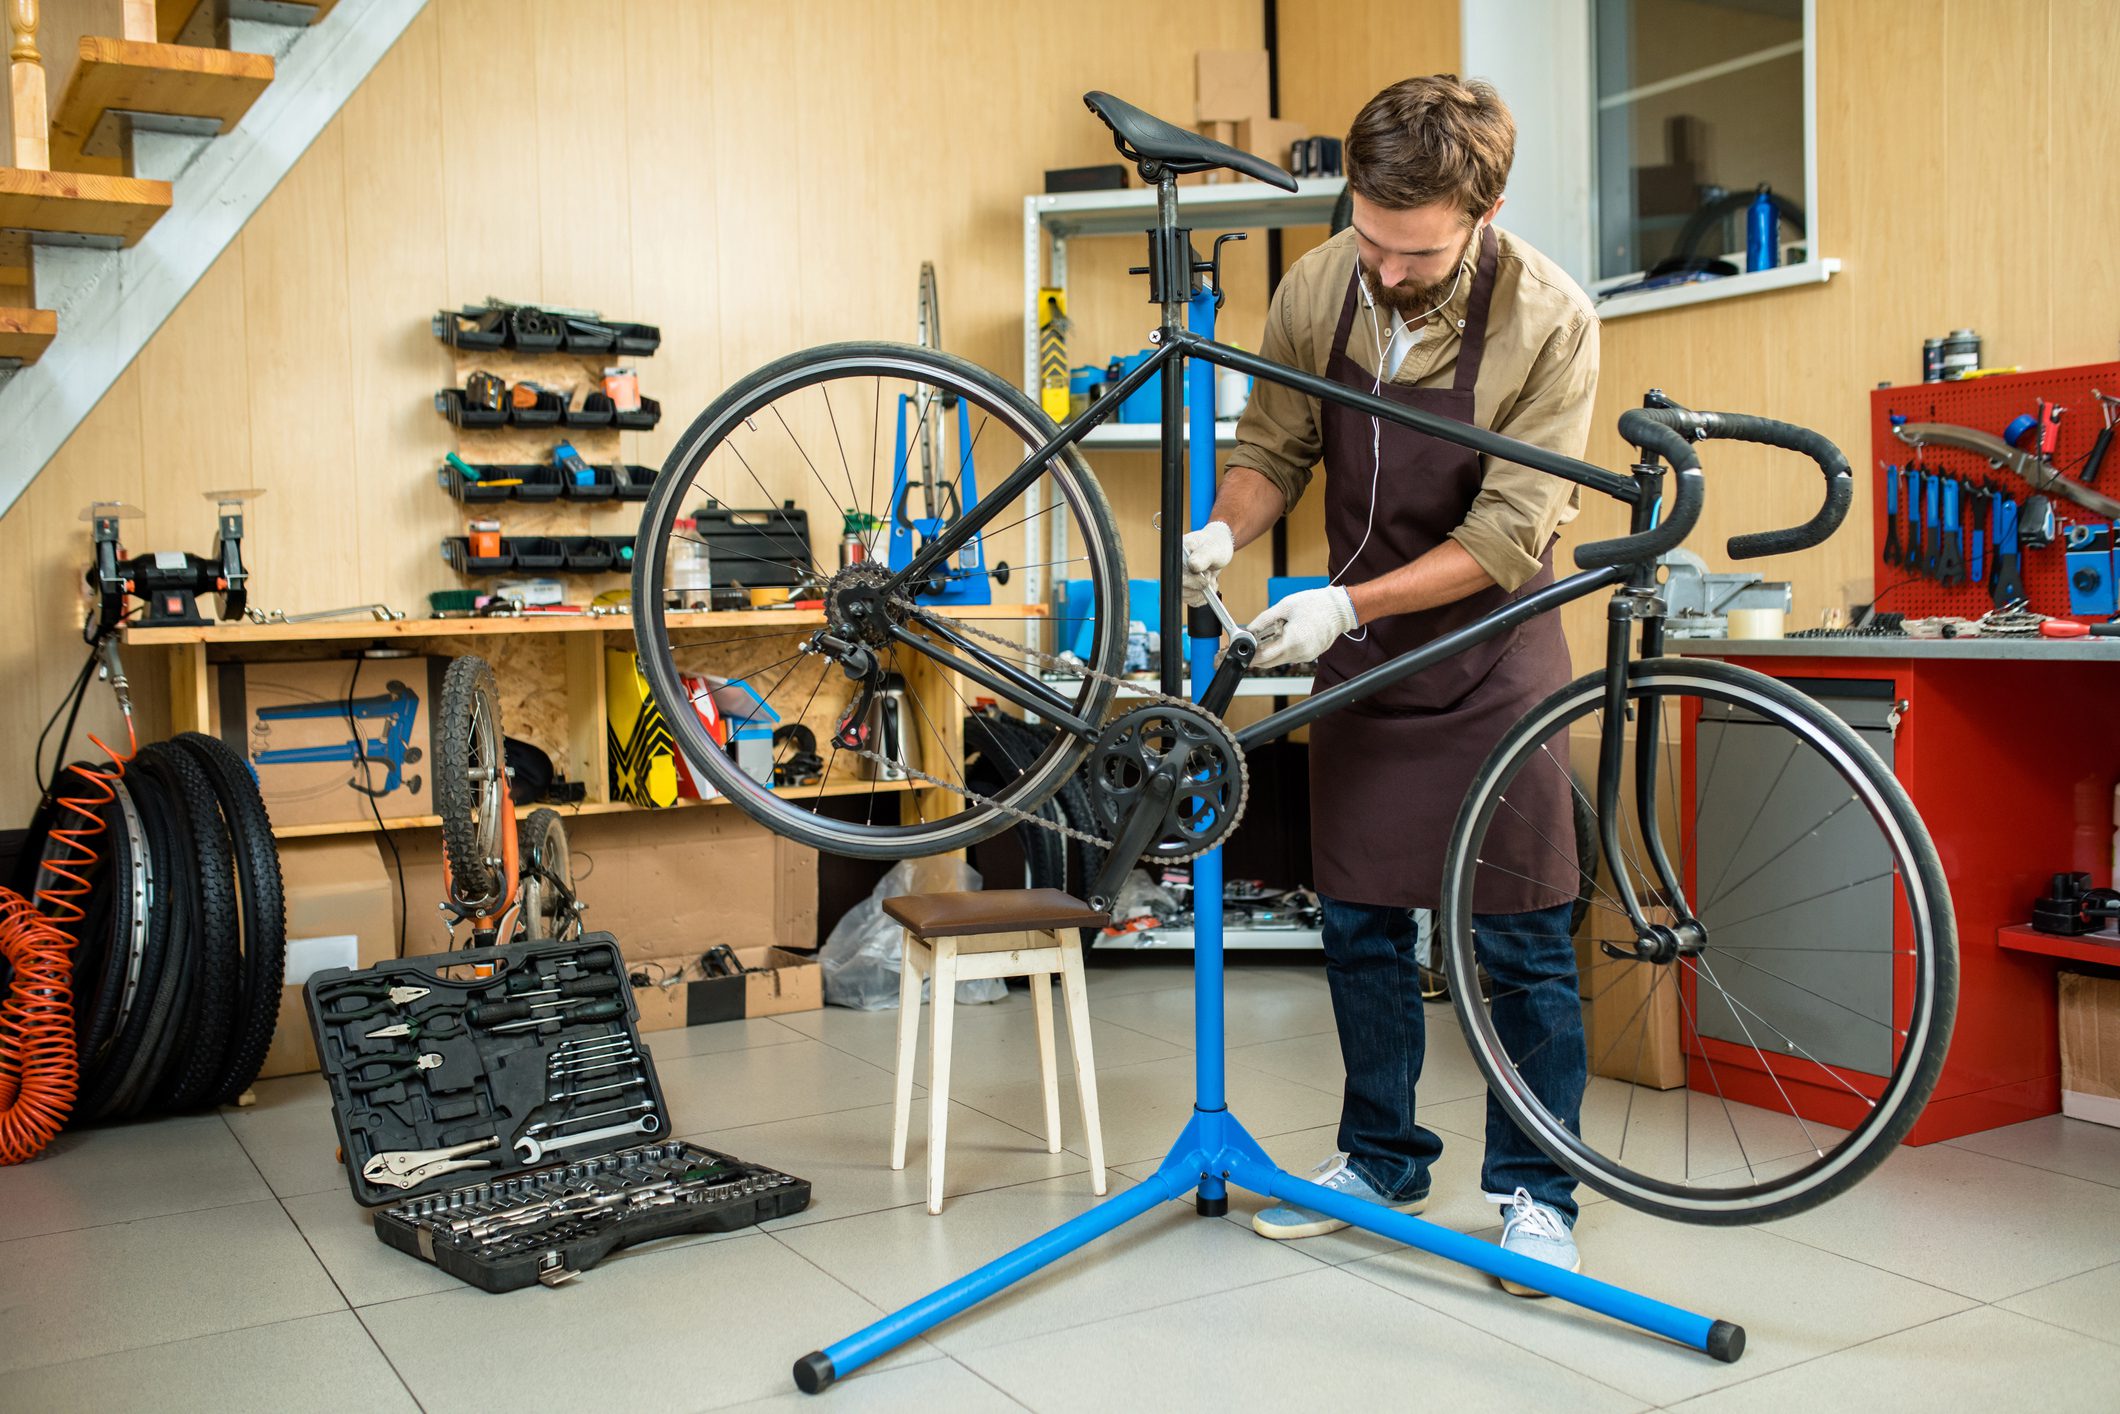 fixing a bike Fixing bike istock only - GettyImages 865880274